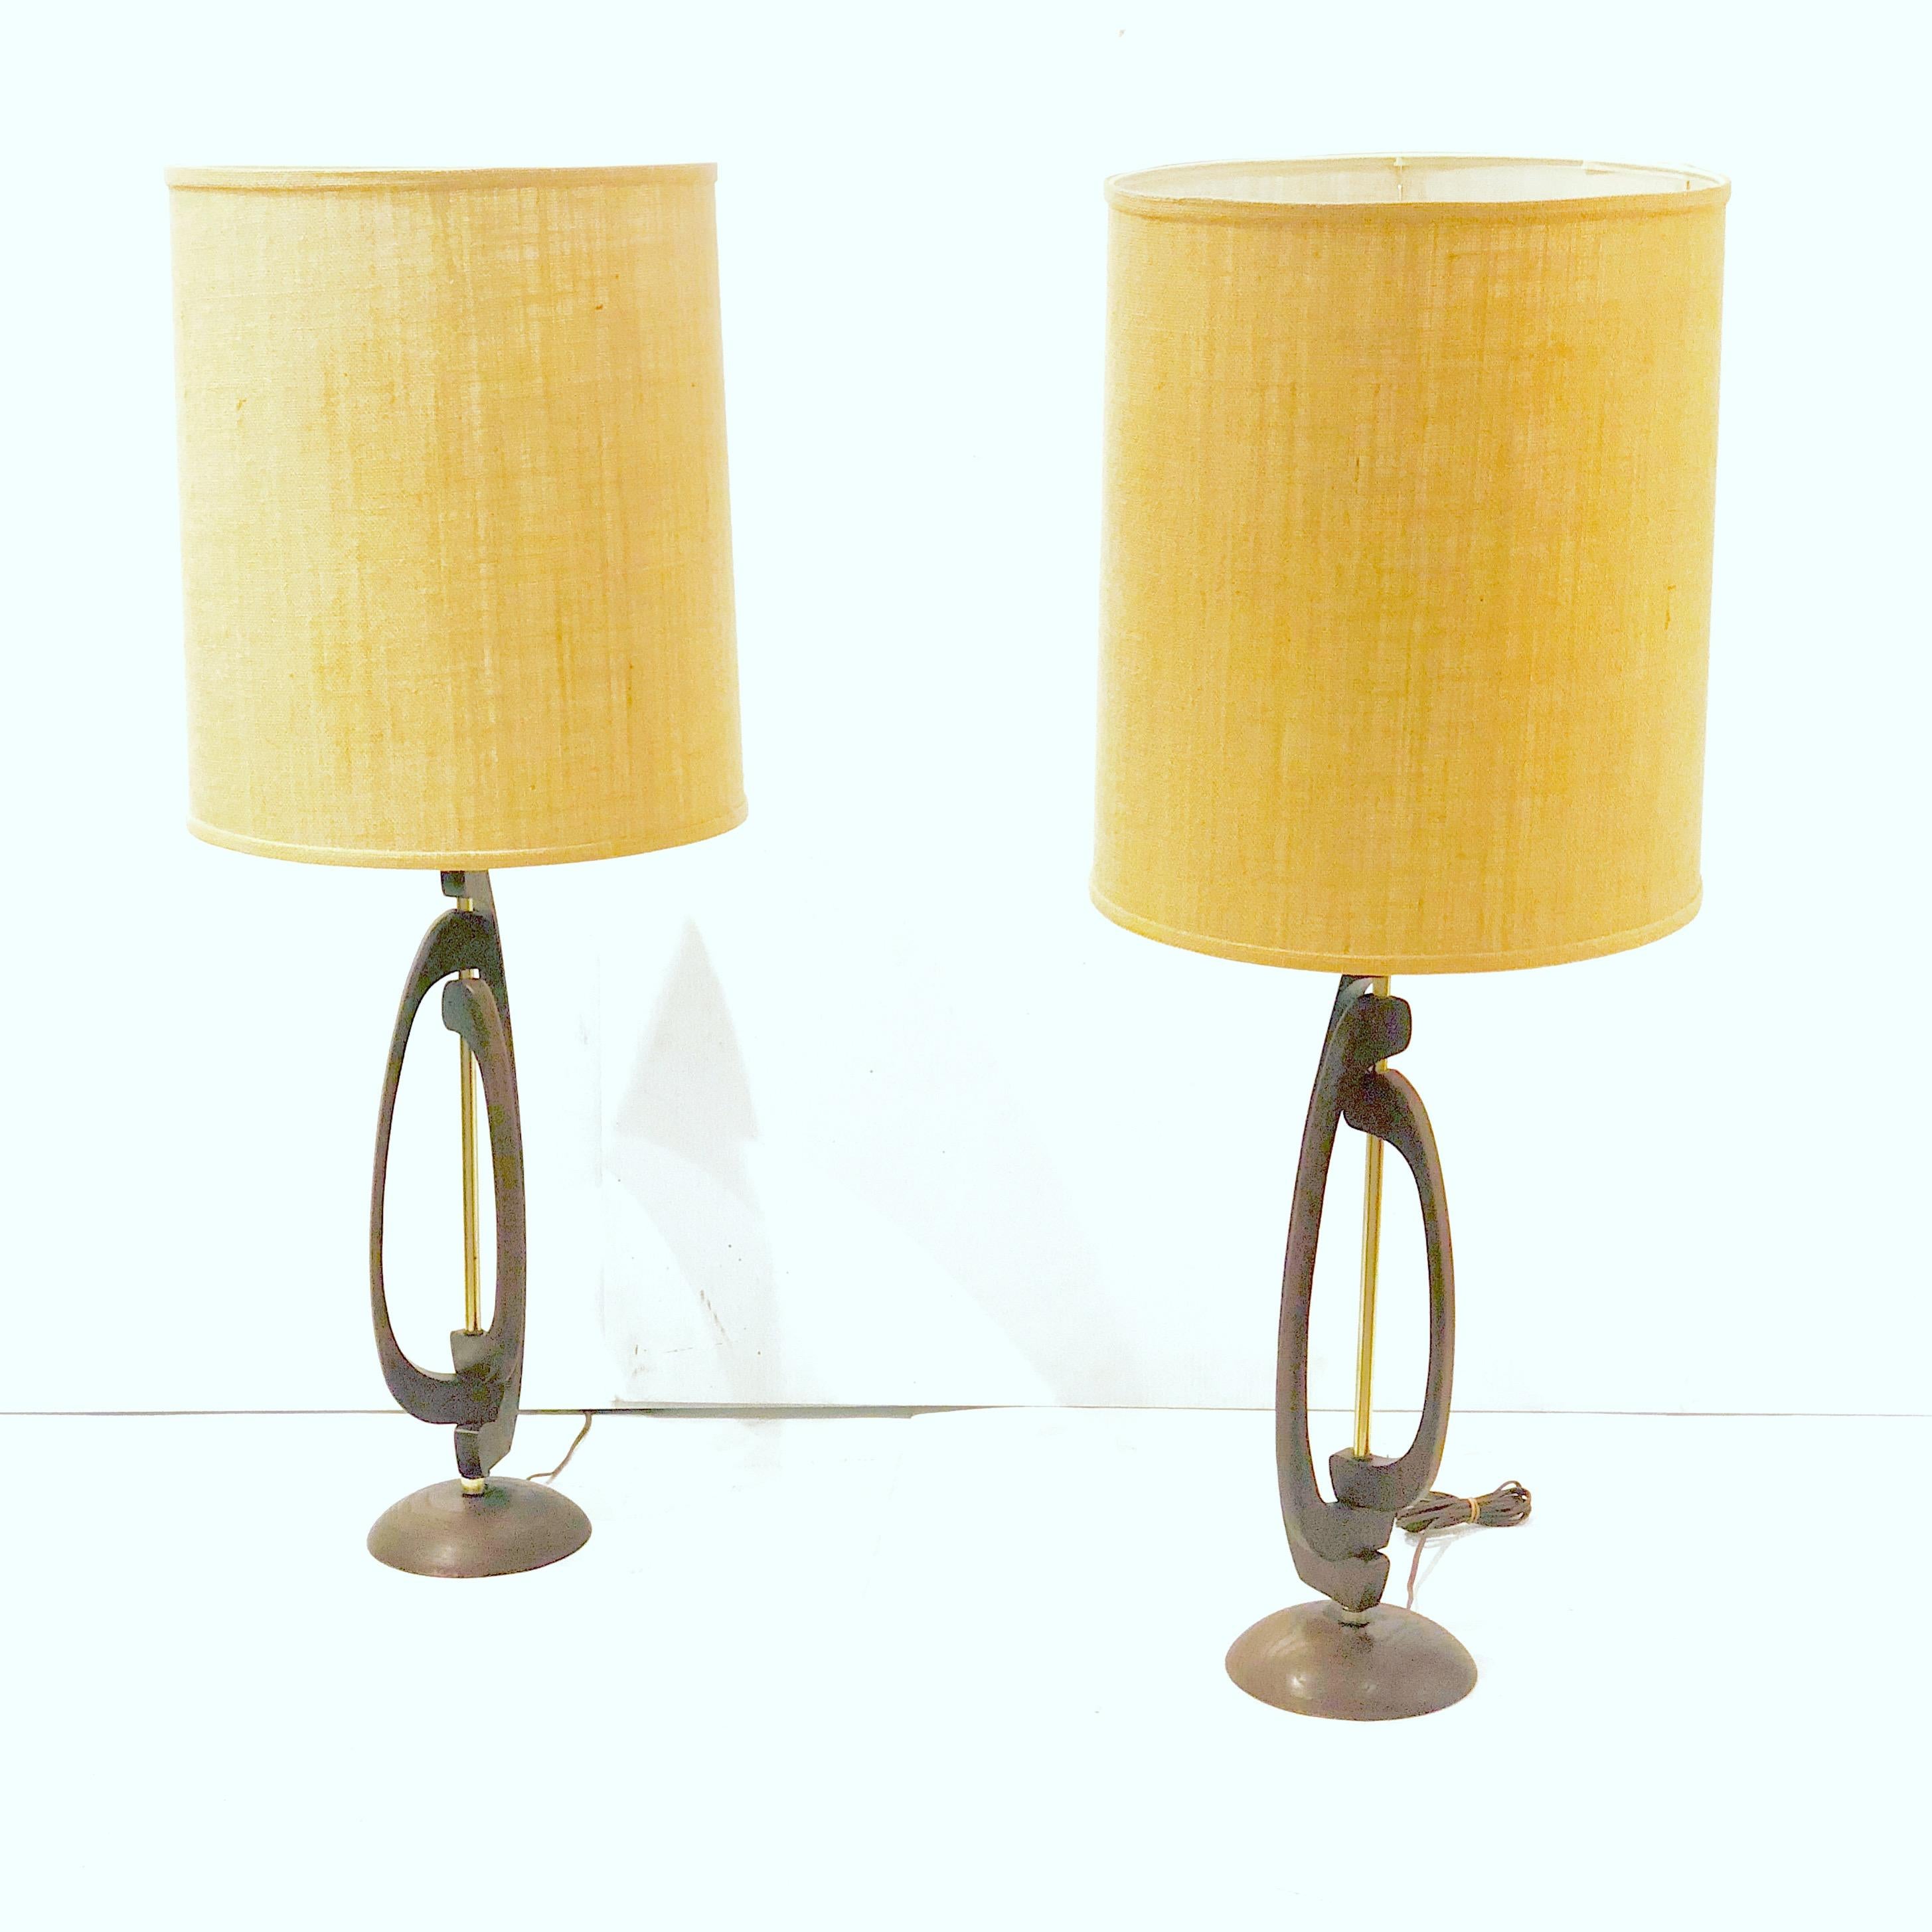 Pair of Mid-Century Modern Table Lamps by Modeline 1